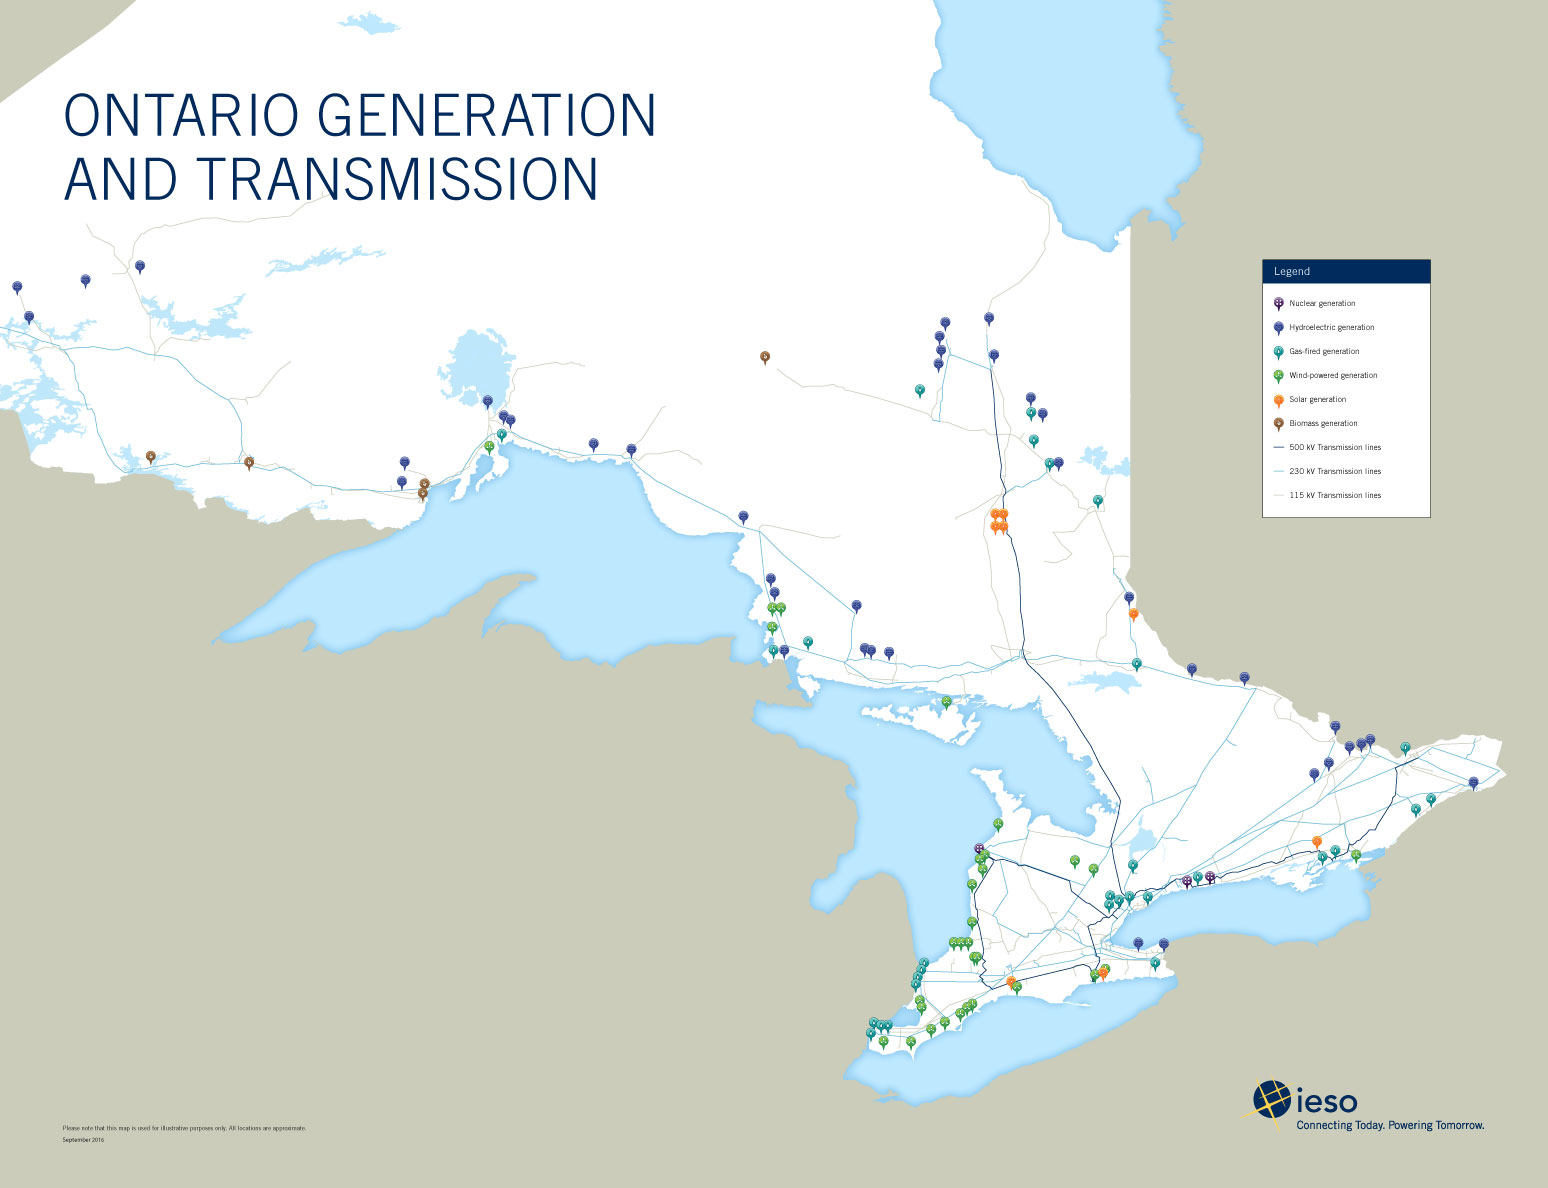 A map of Ontario showing how electricity is transmitted around the province.